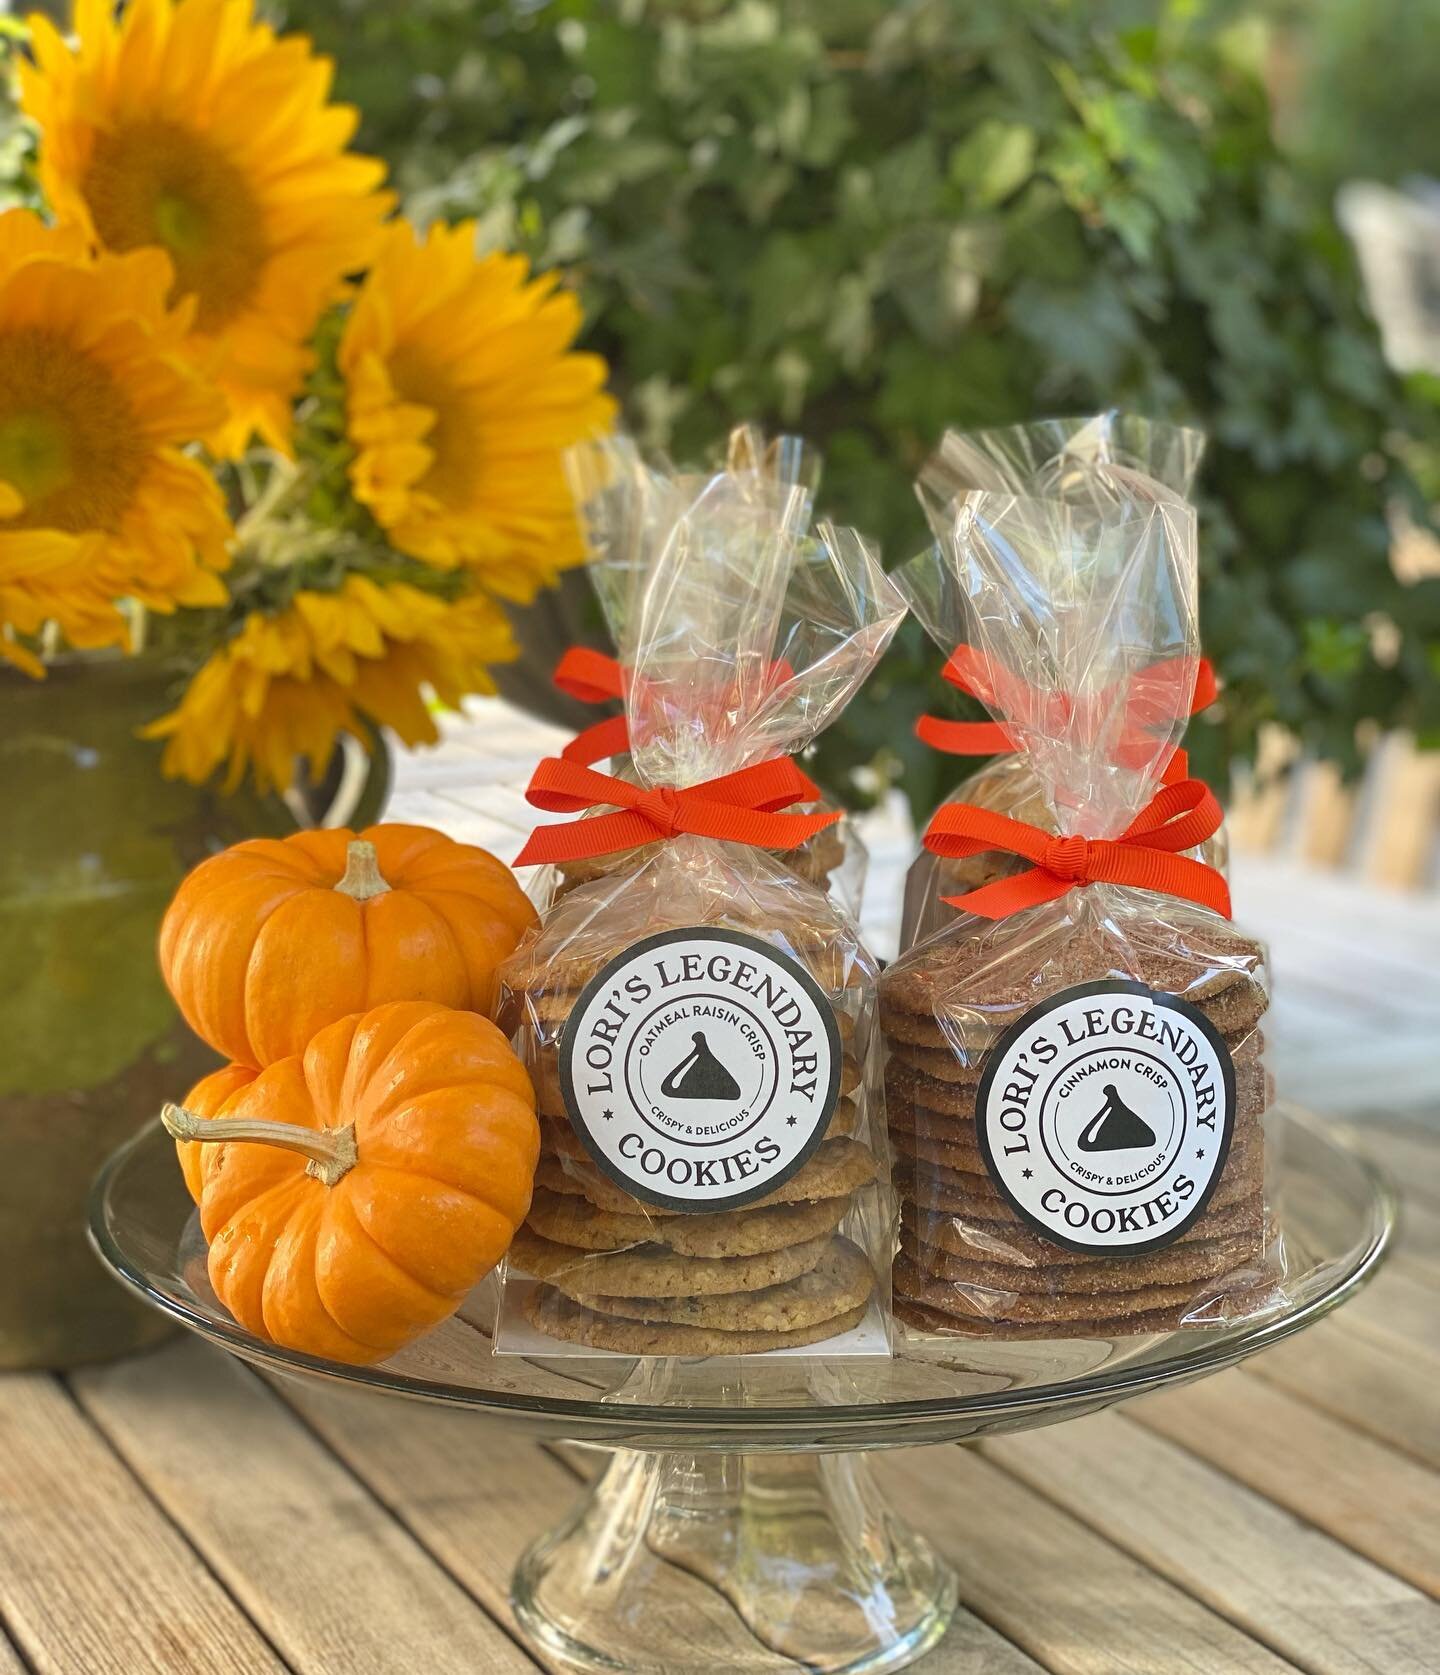 Fall is in the air and the holidays are around the corner! We have been busy baking away and getting ready for the season ahead. Come see us at @wishwalnutcreek Pop-Up this Saturday 9th! Shop small, support local vendors and get your cookie fix!